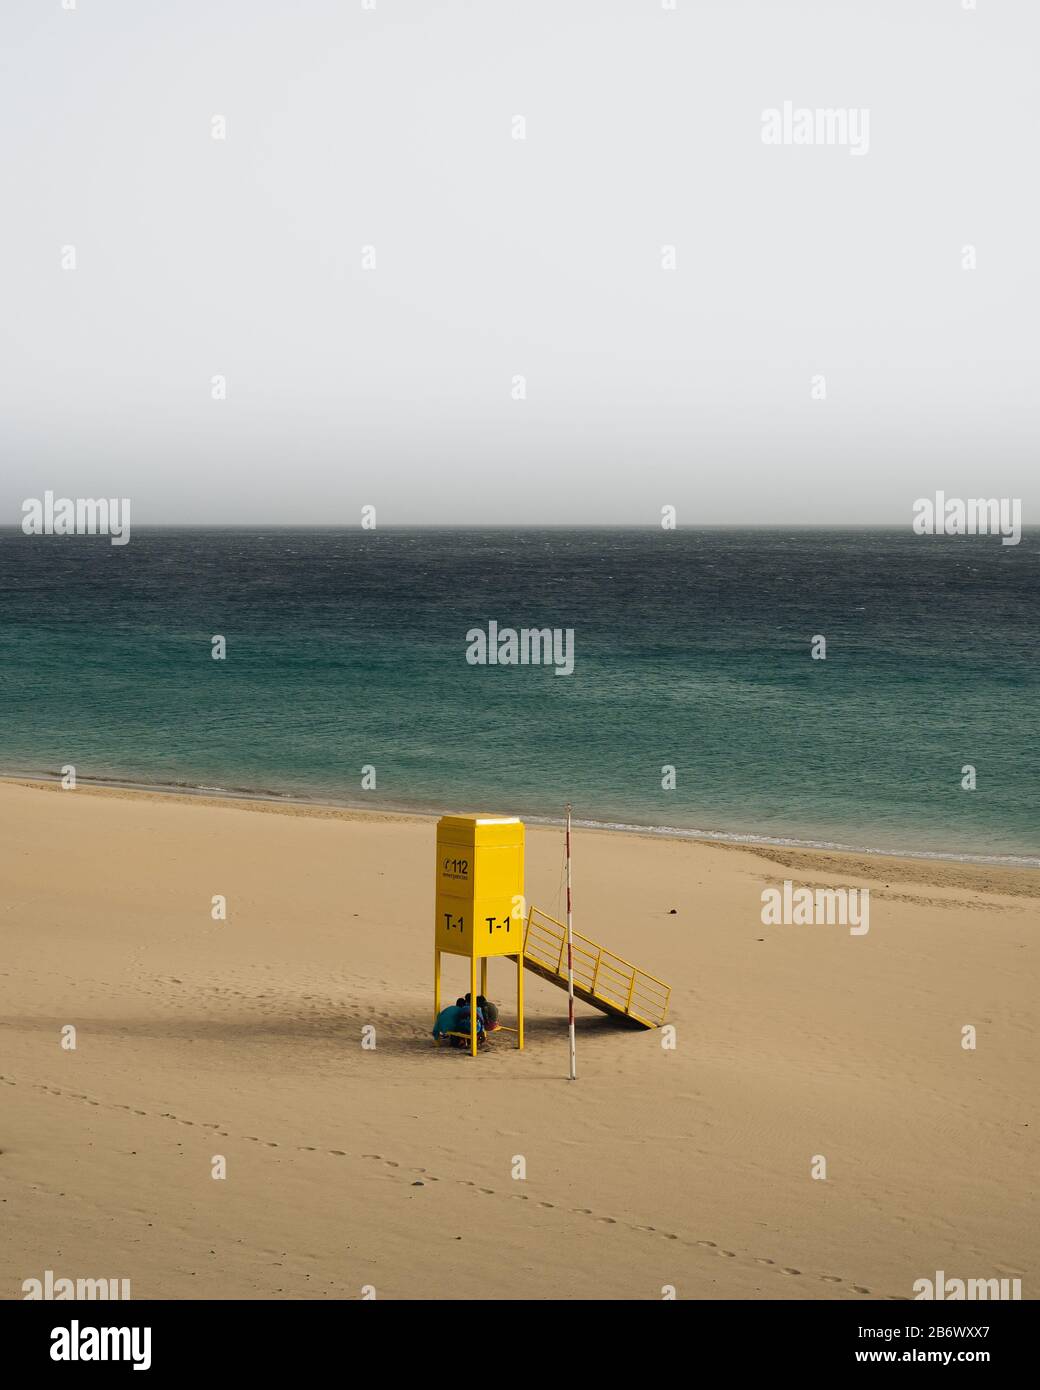 Very calm shot of beach with textured sand hills, blue water and yellow rescue post Stock Photo